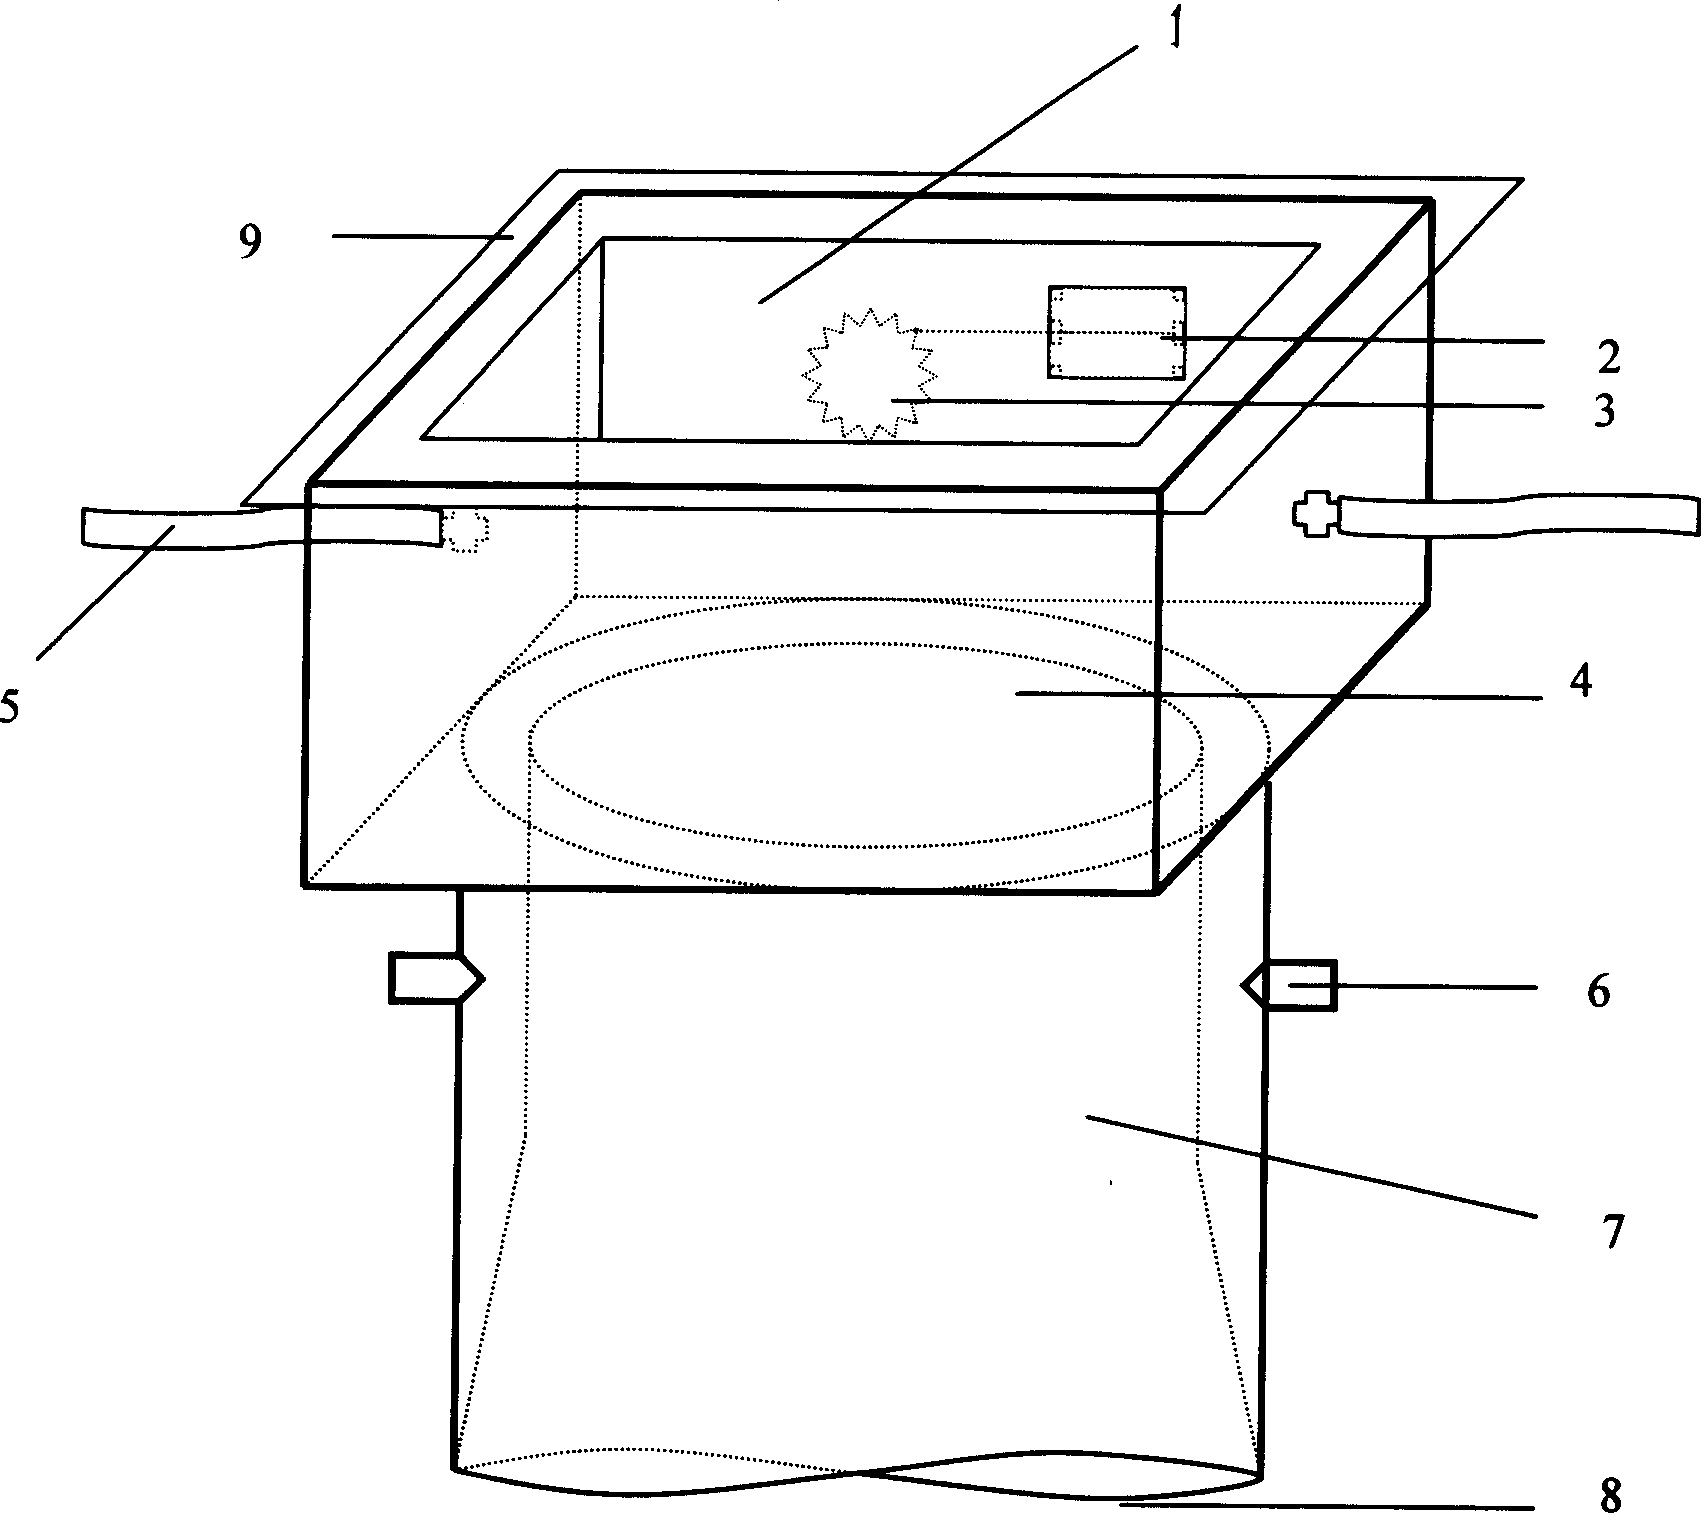 Canopy leaf chamber for determining plant canopy population photosynthesis